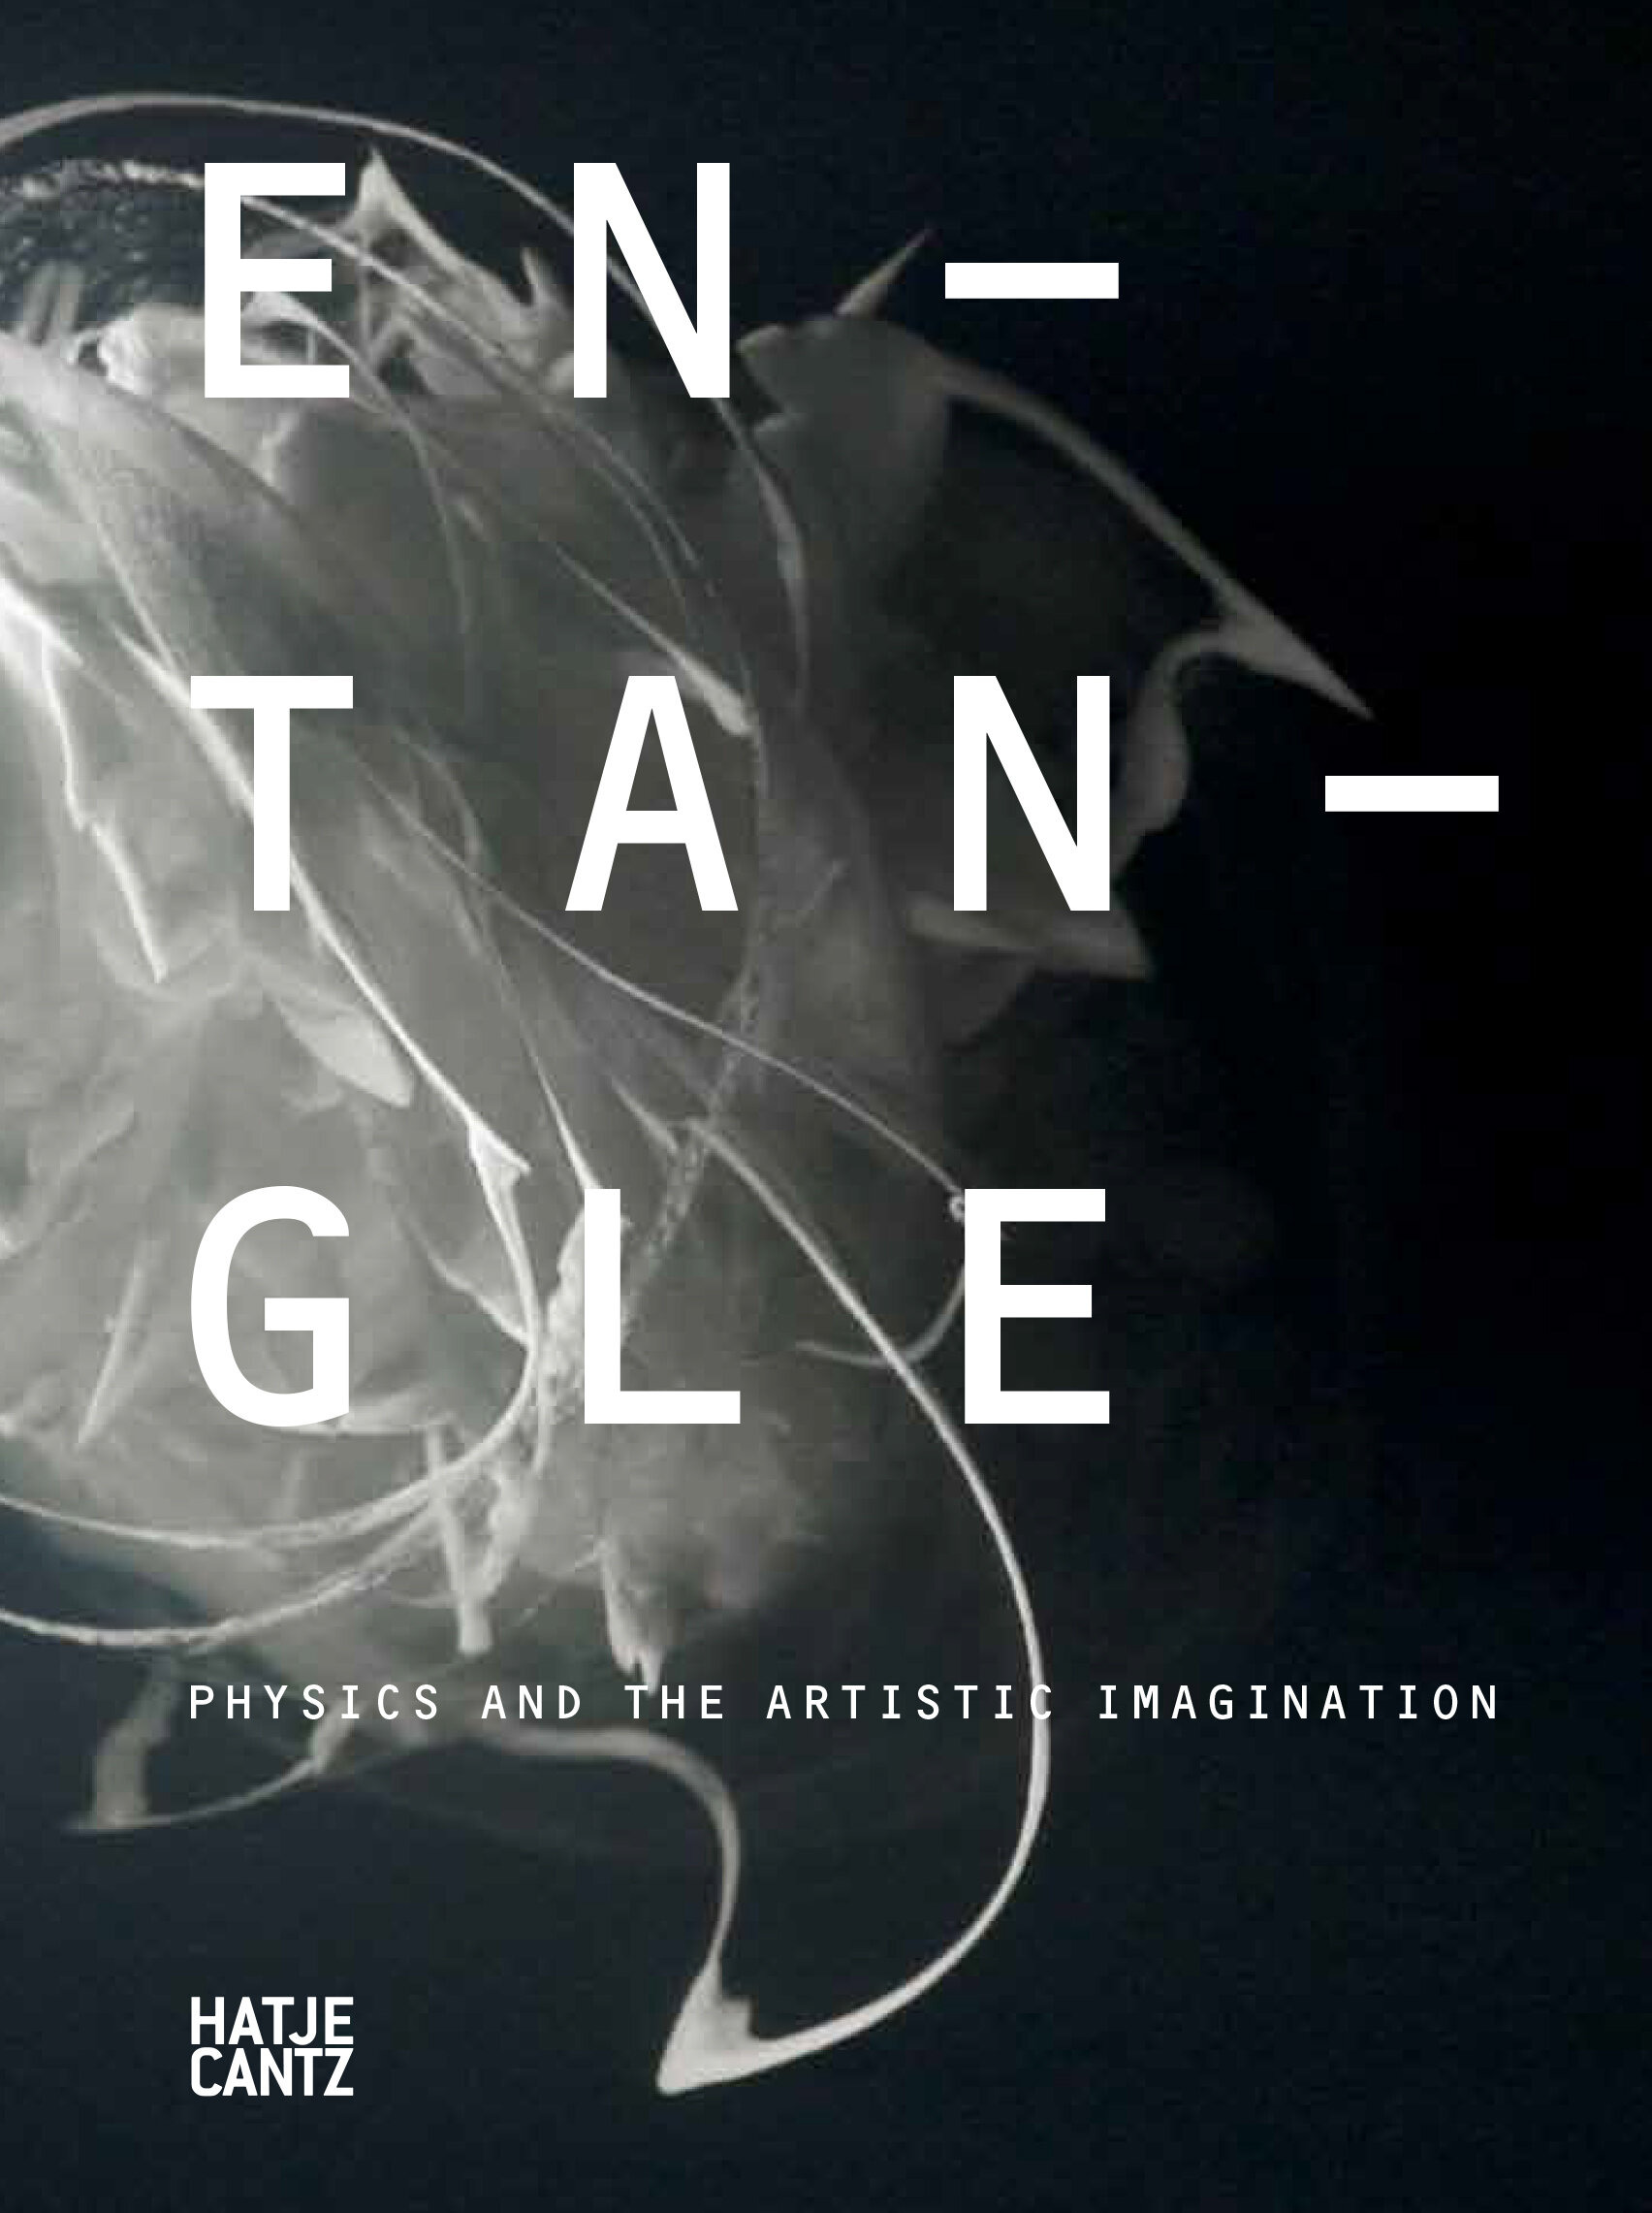 Entangle: Physics and the Artistic Imagination